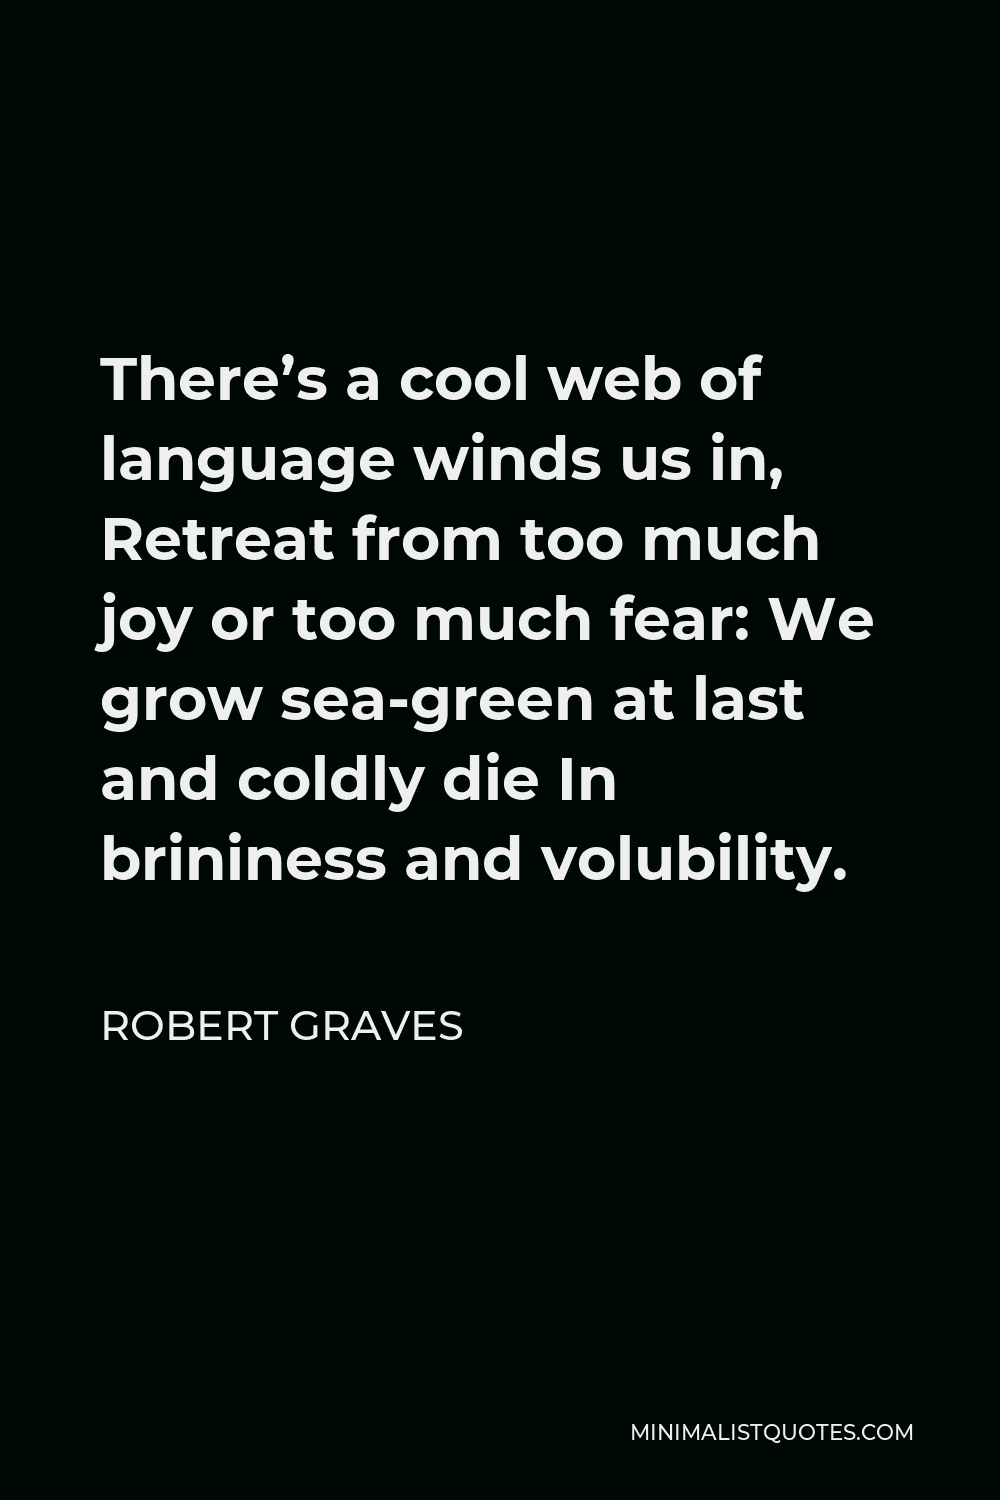 Robert Graves Quote - There’s a cool web of language winds us in, Retreat from too much joy or too much fear: We grow sea-green at last and coldly die In brininess and volubility.